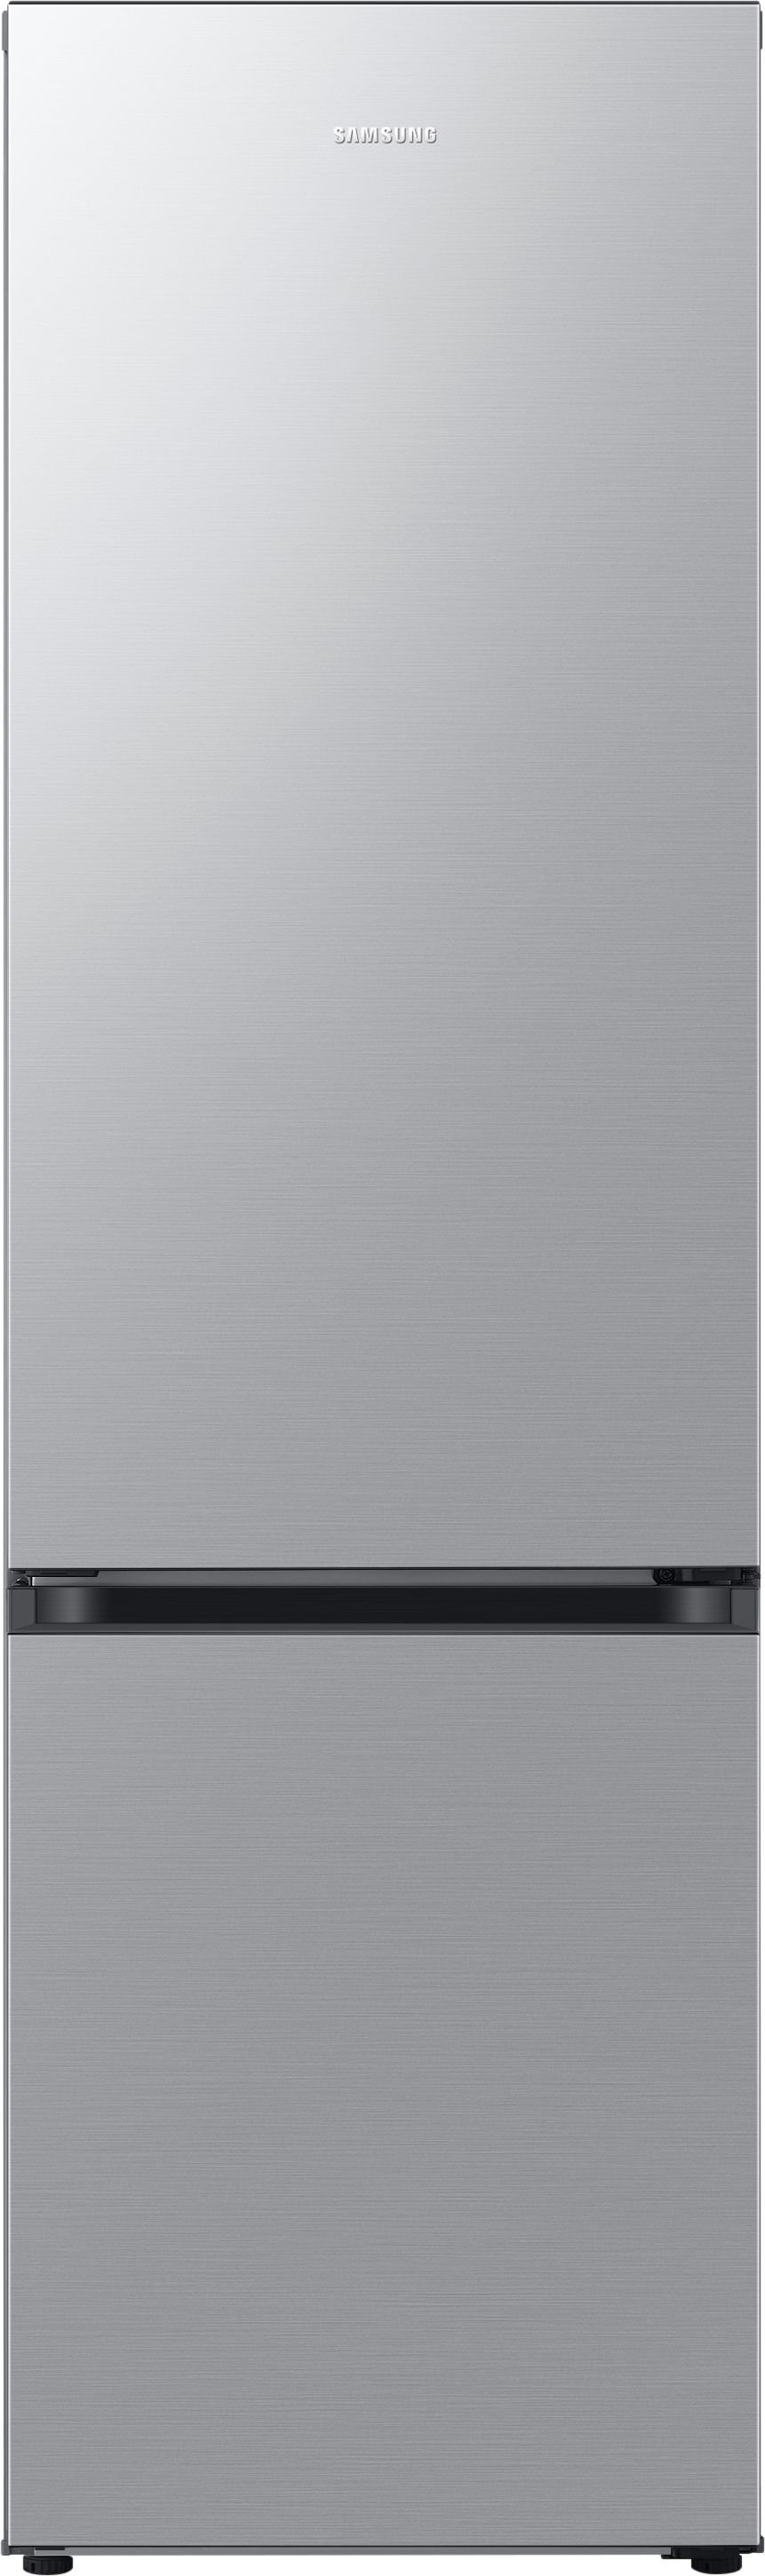 Samsung Series 5 RB38C602ESA 70/30 No Frost Fridge Freezer - Silver - E Rated, Silver